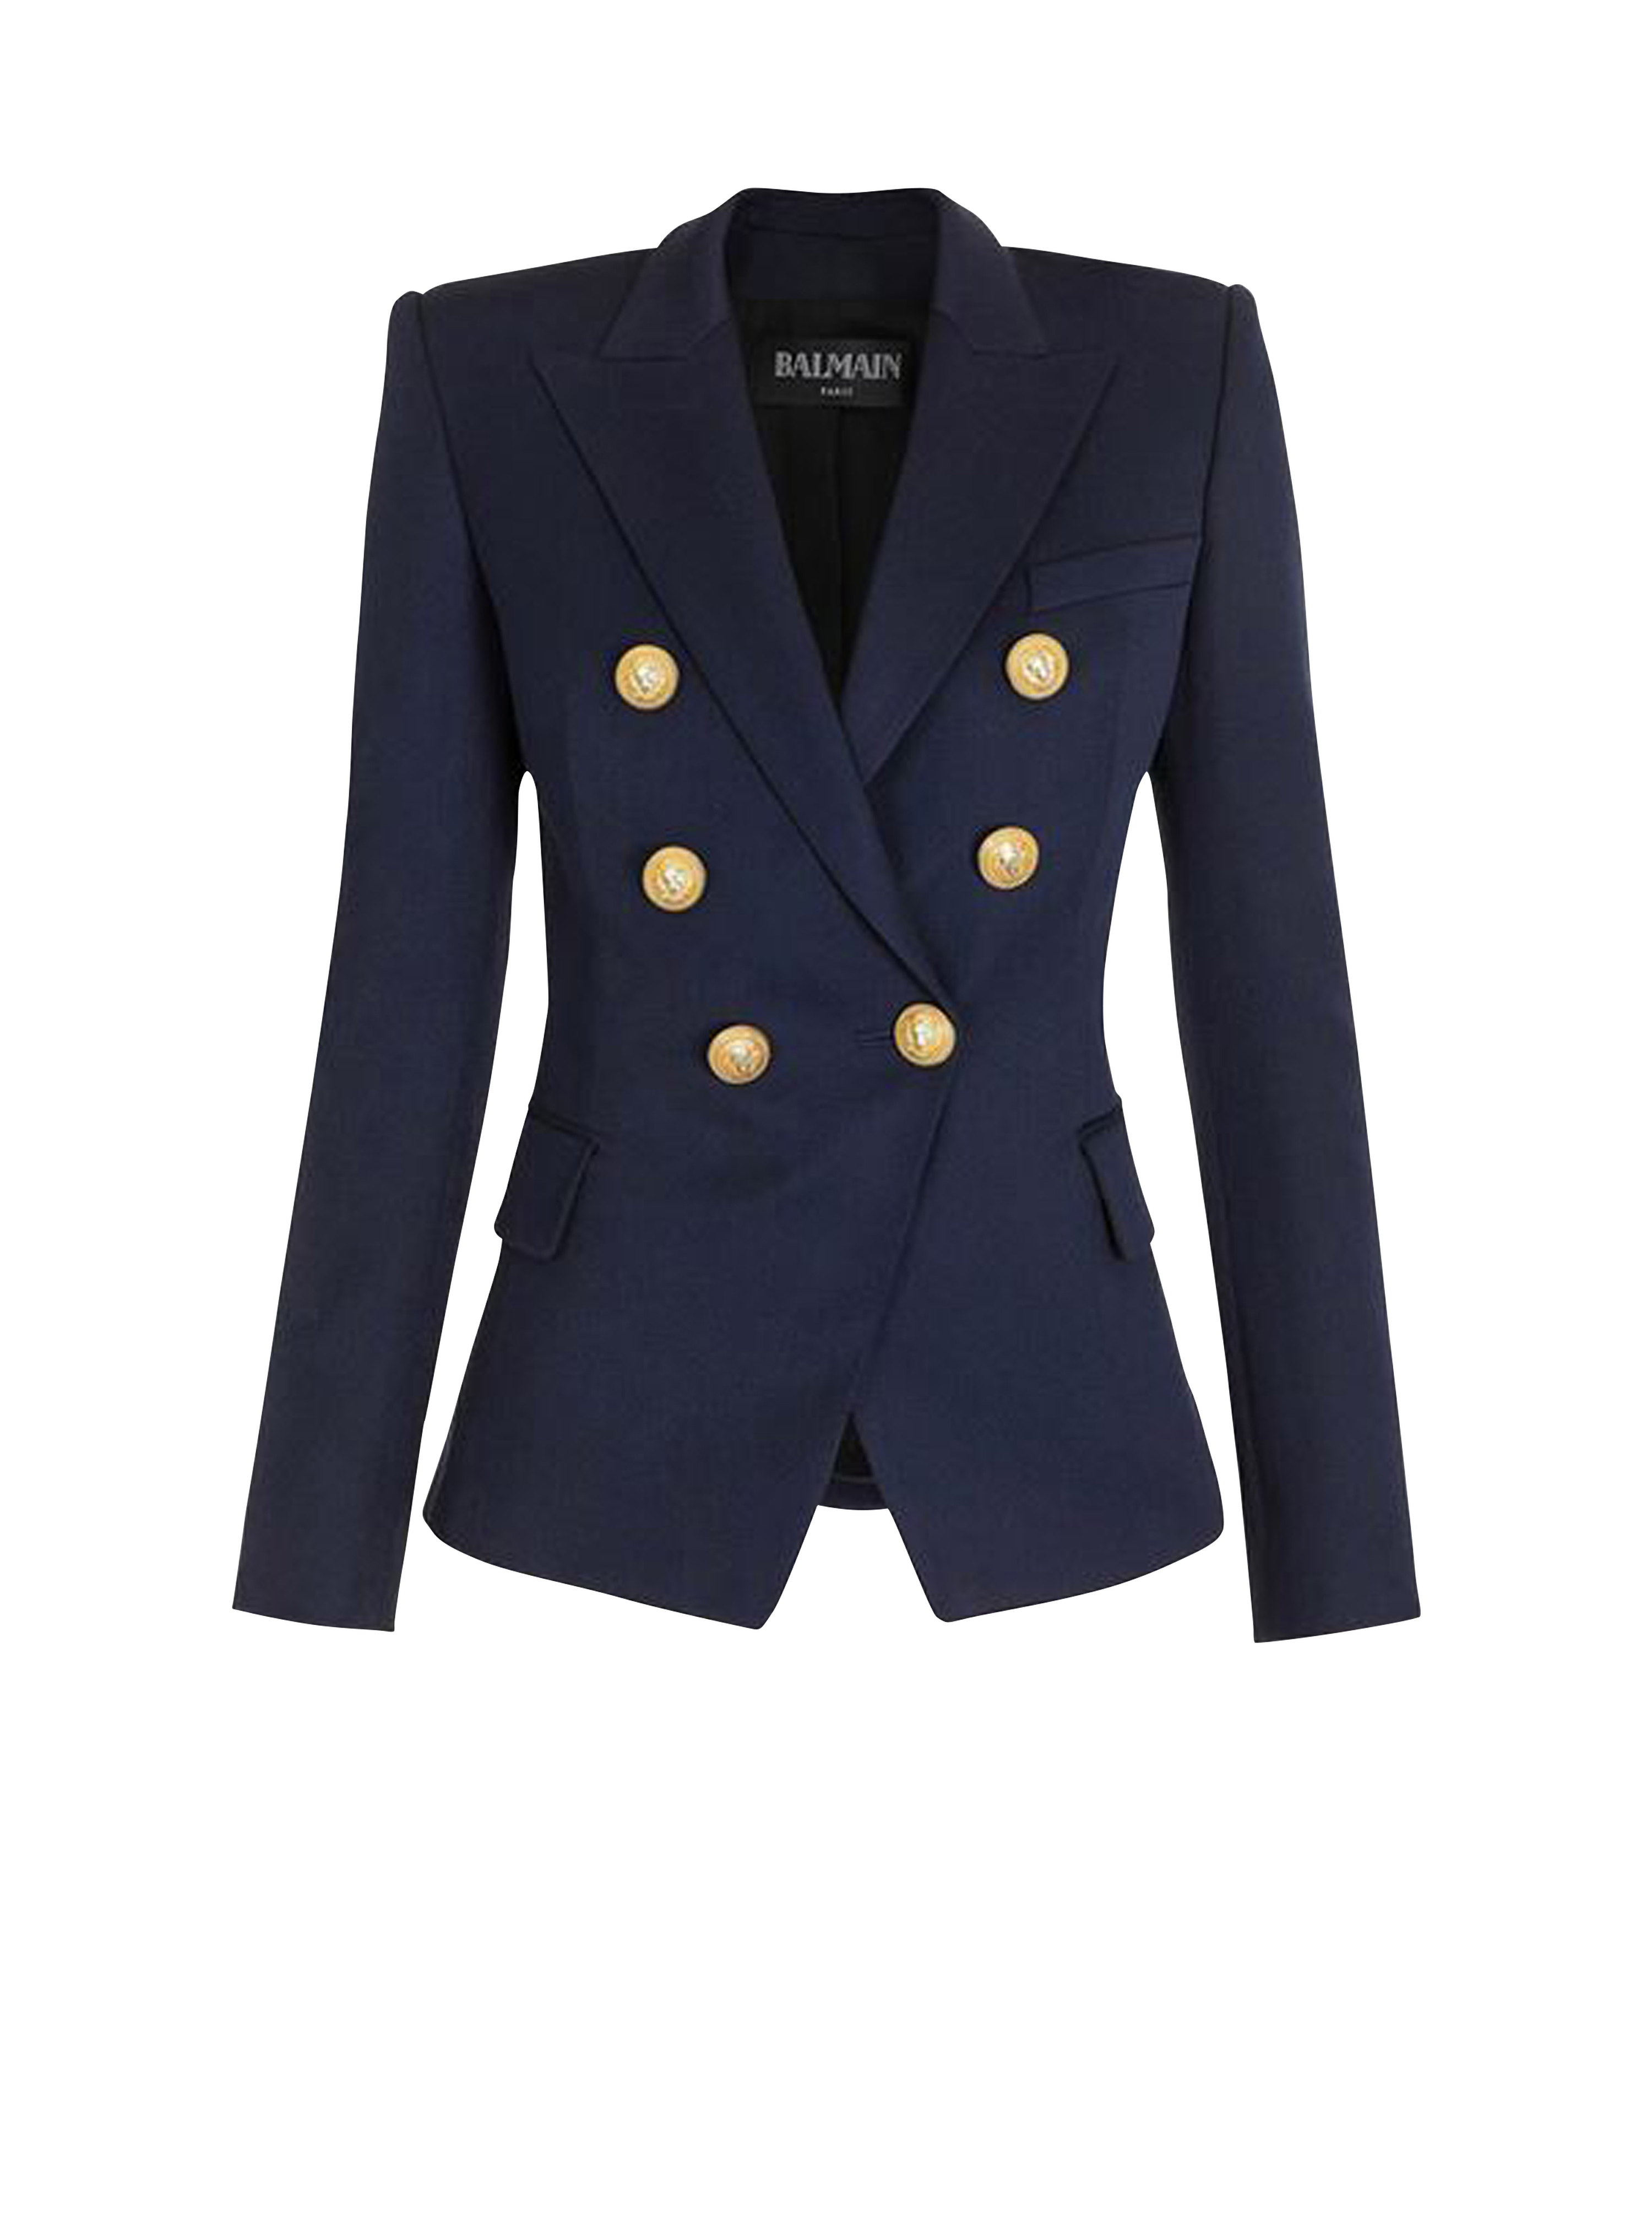 Wool double-breasted jacket, navy